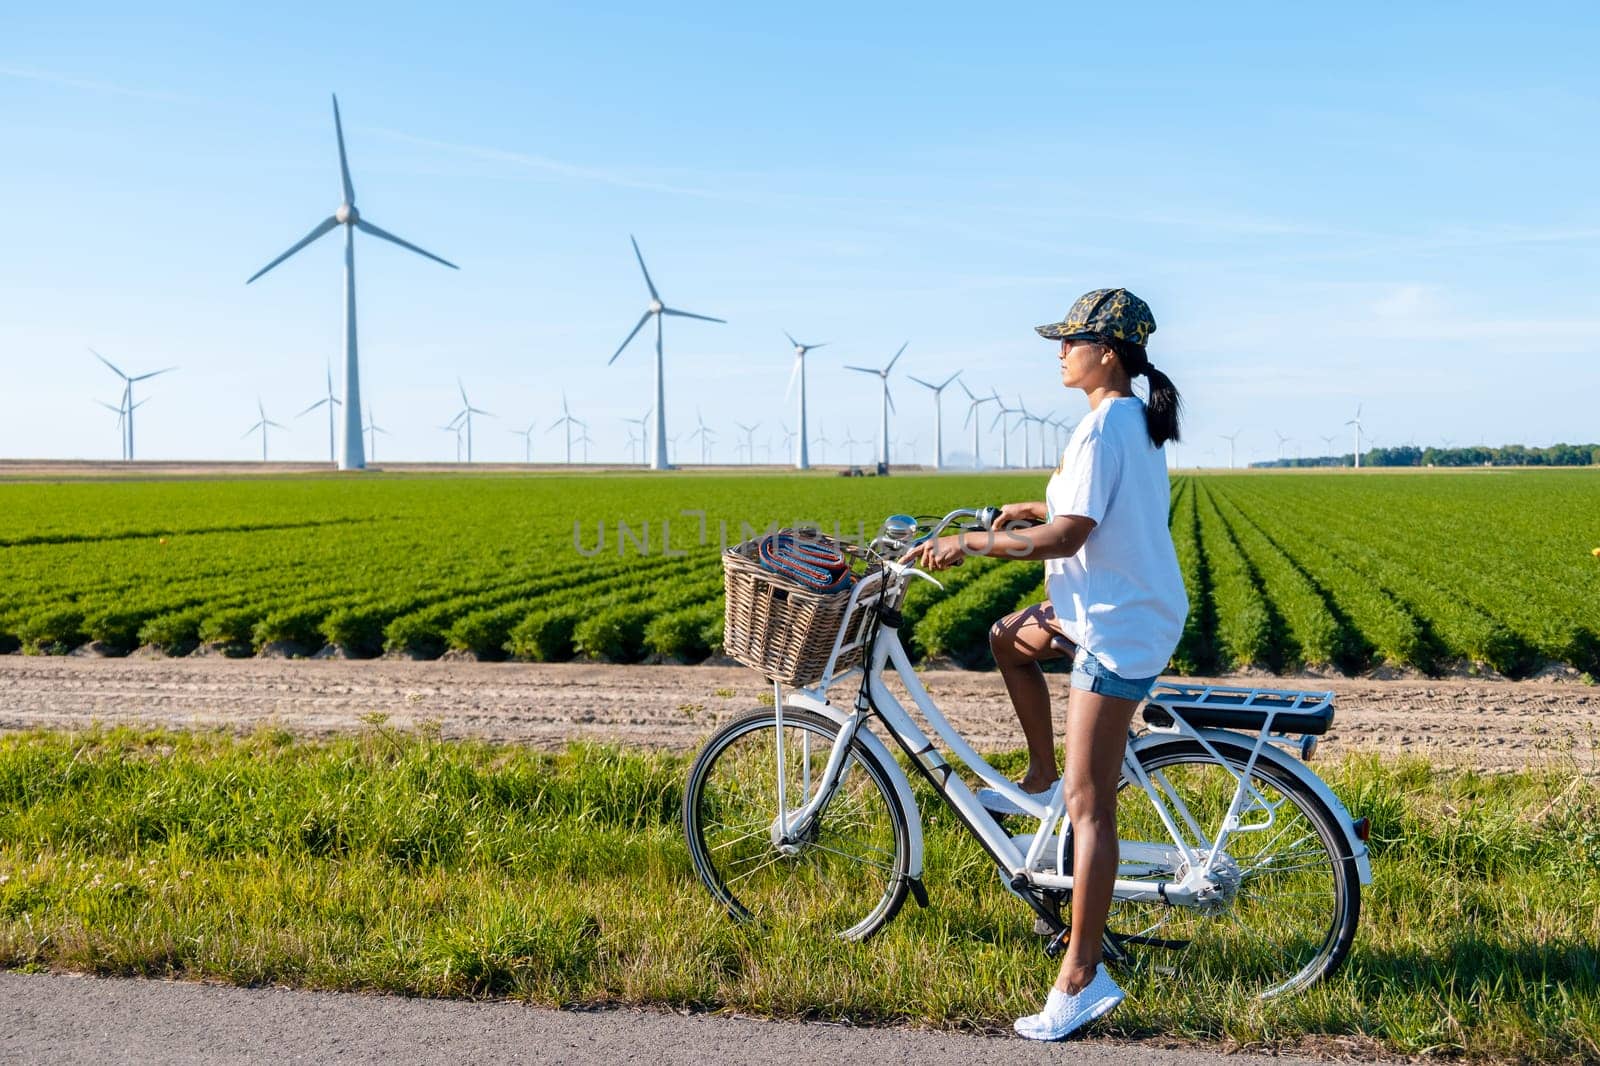 young woman electric green bike bicycle by a windmill farm with a green agricultural field, windmills isolated on a beautiful bright day in Netherlands Flevoland Noordoostpolder